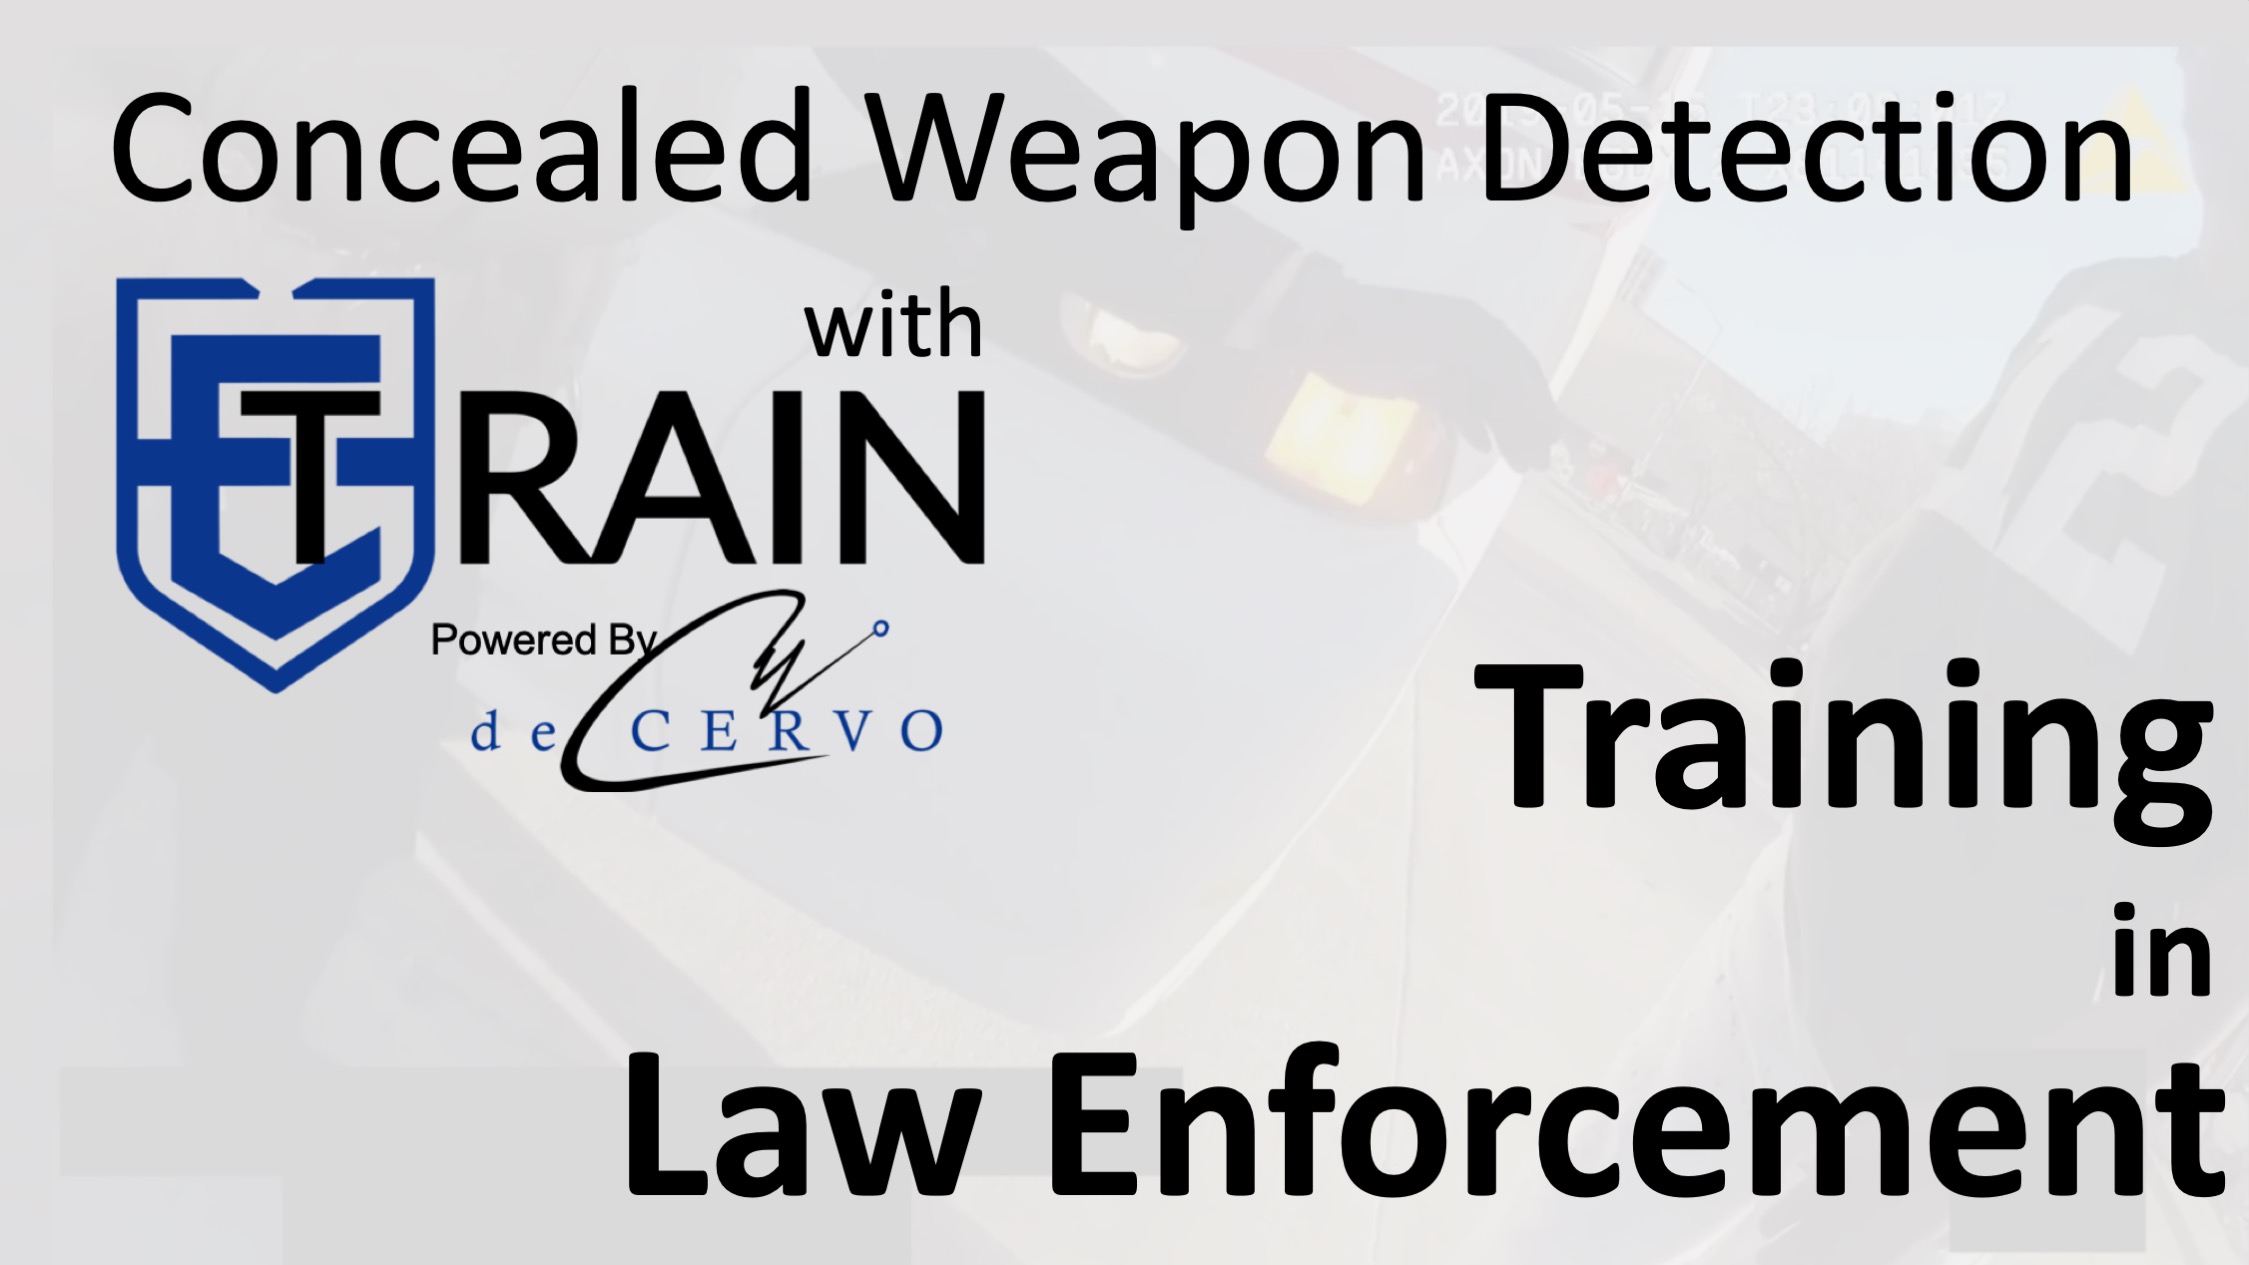 concealed weapon detection case study on decision training in police